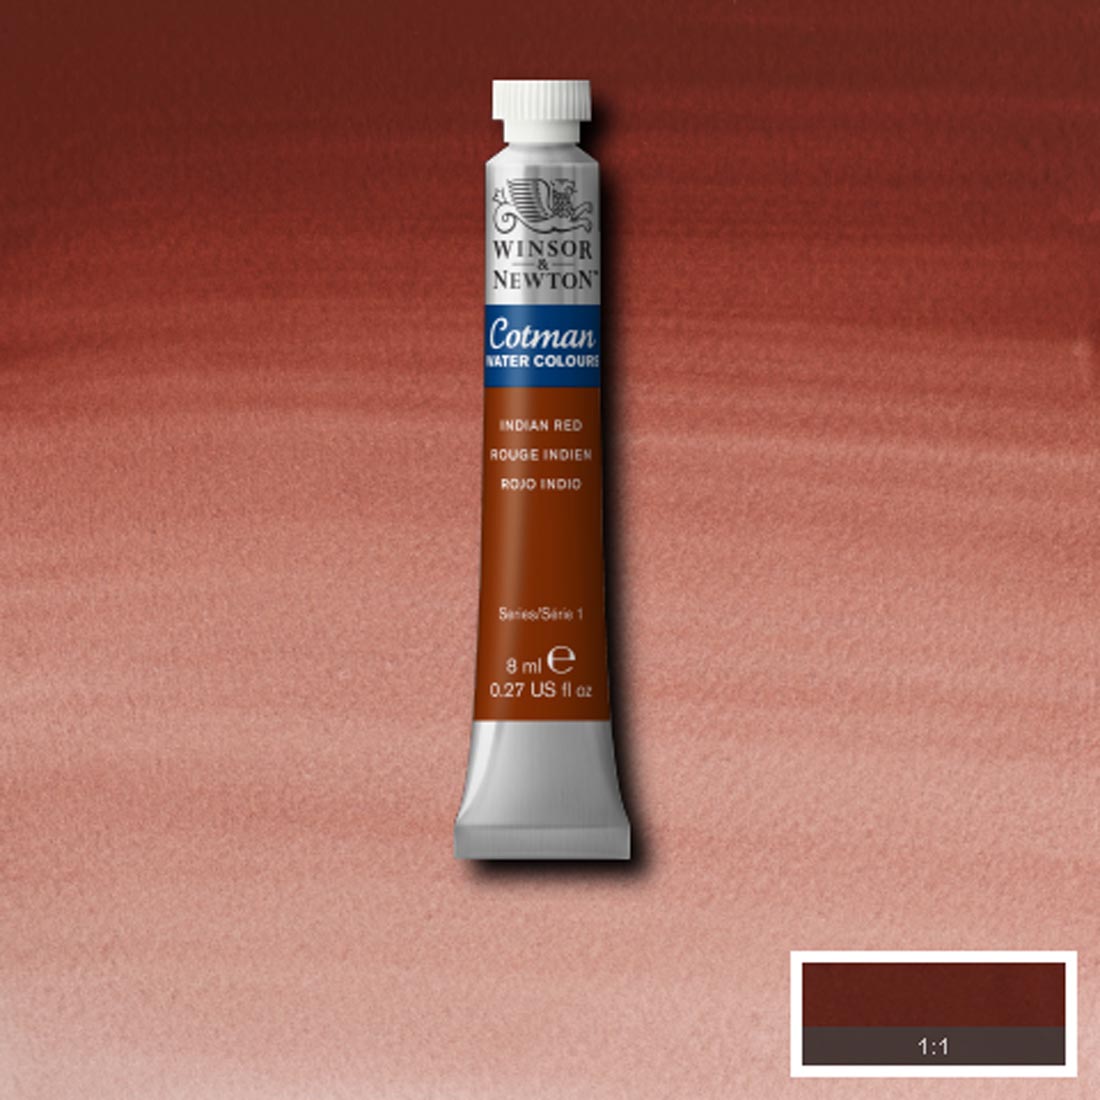 Tube of Indian Red Winsor and Newton Cotman Water Colour with a paint swatch for the background